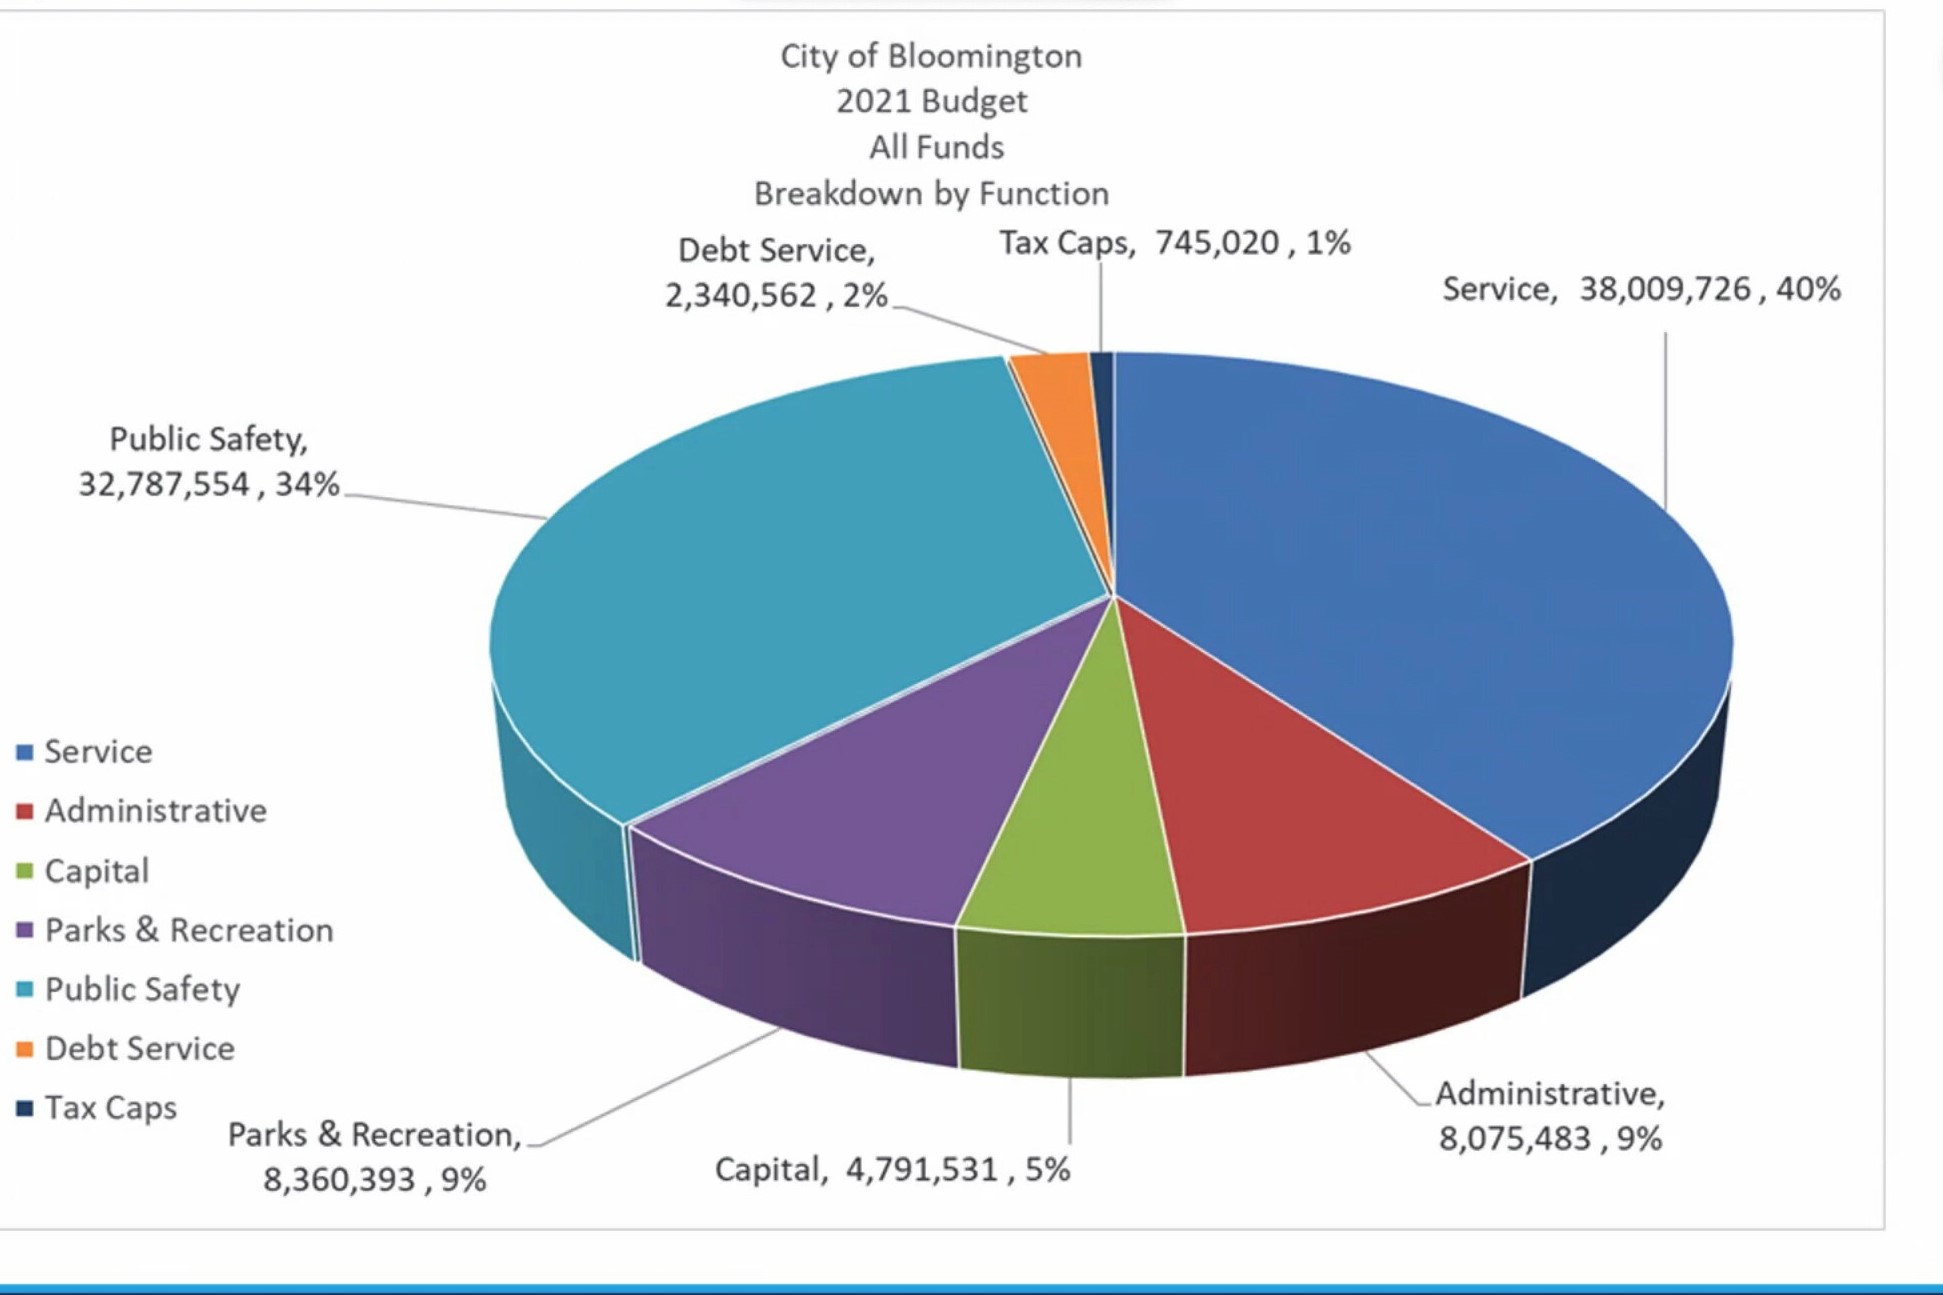 A picture of a chart that breaks down the 2021 budget for the City of Bloomington